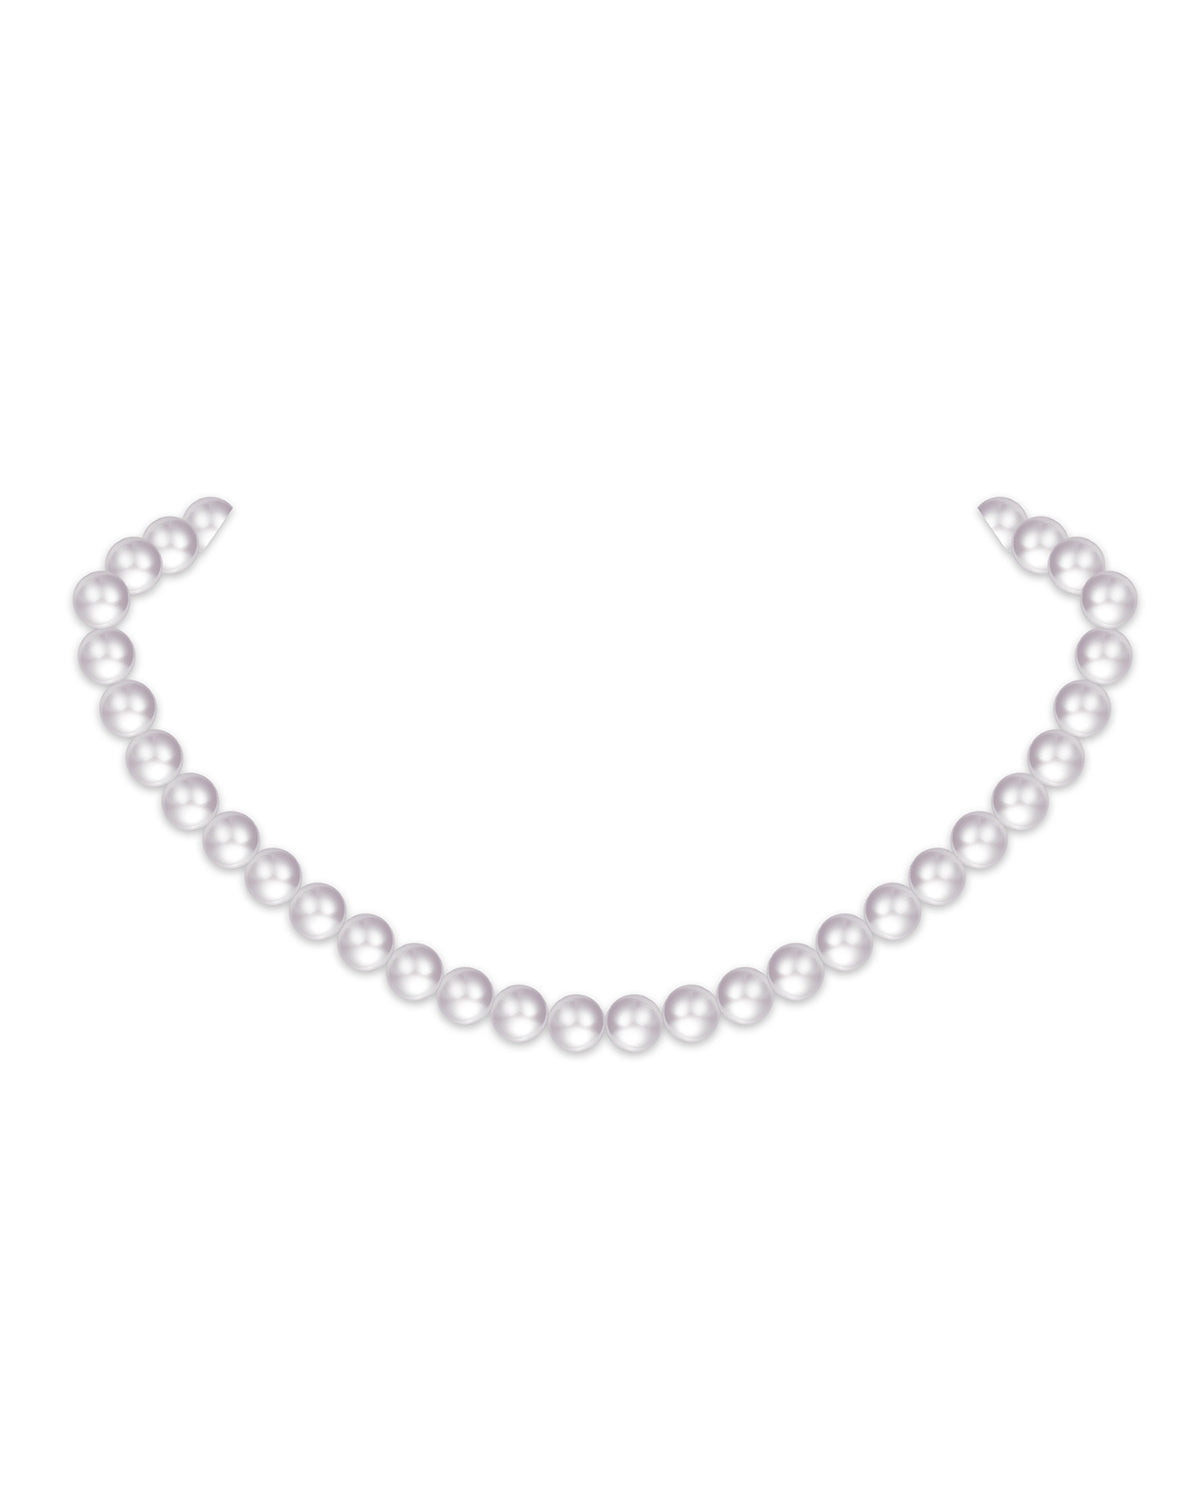 7.5-8.0mm Japanese Akoya White Pearl Necklace- AAA Quality - Preala Jewels #